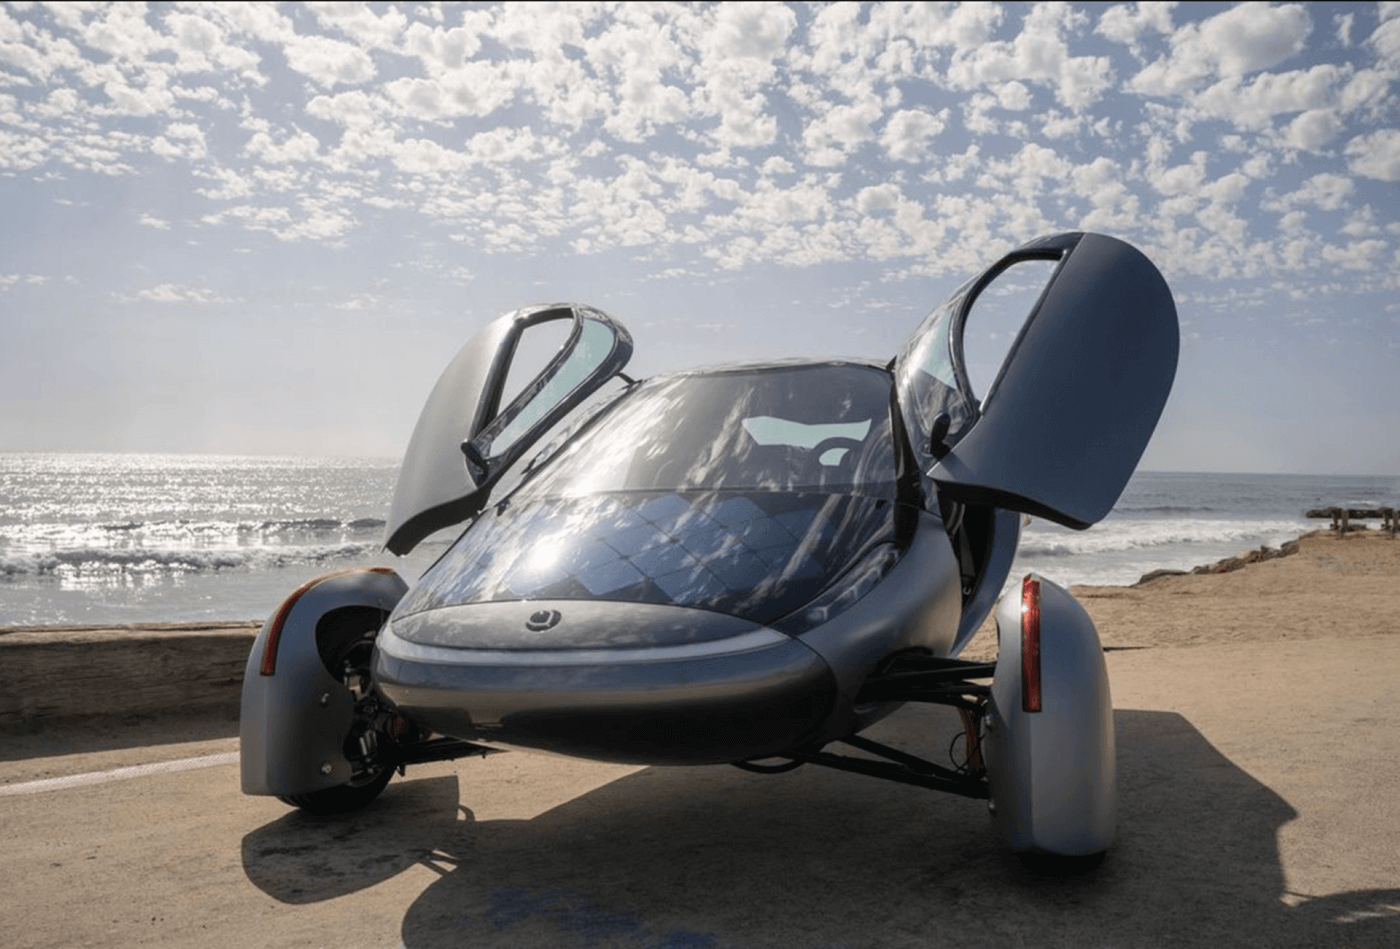 Solar Cars,
How to talk about climate change